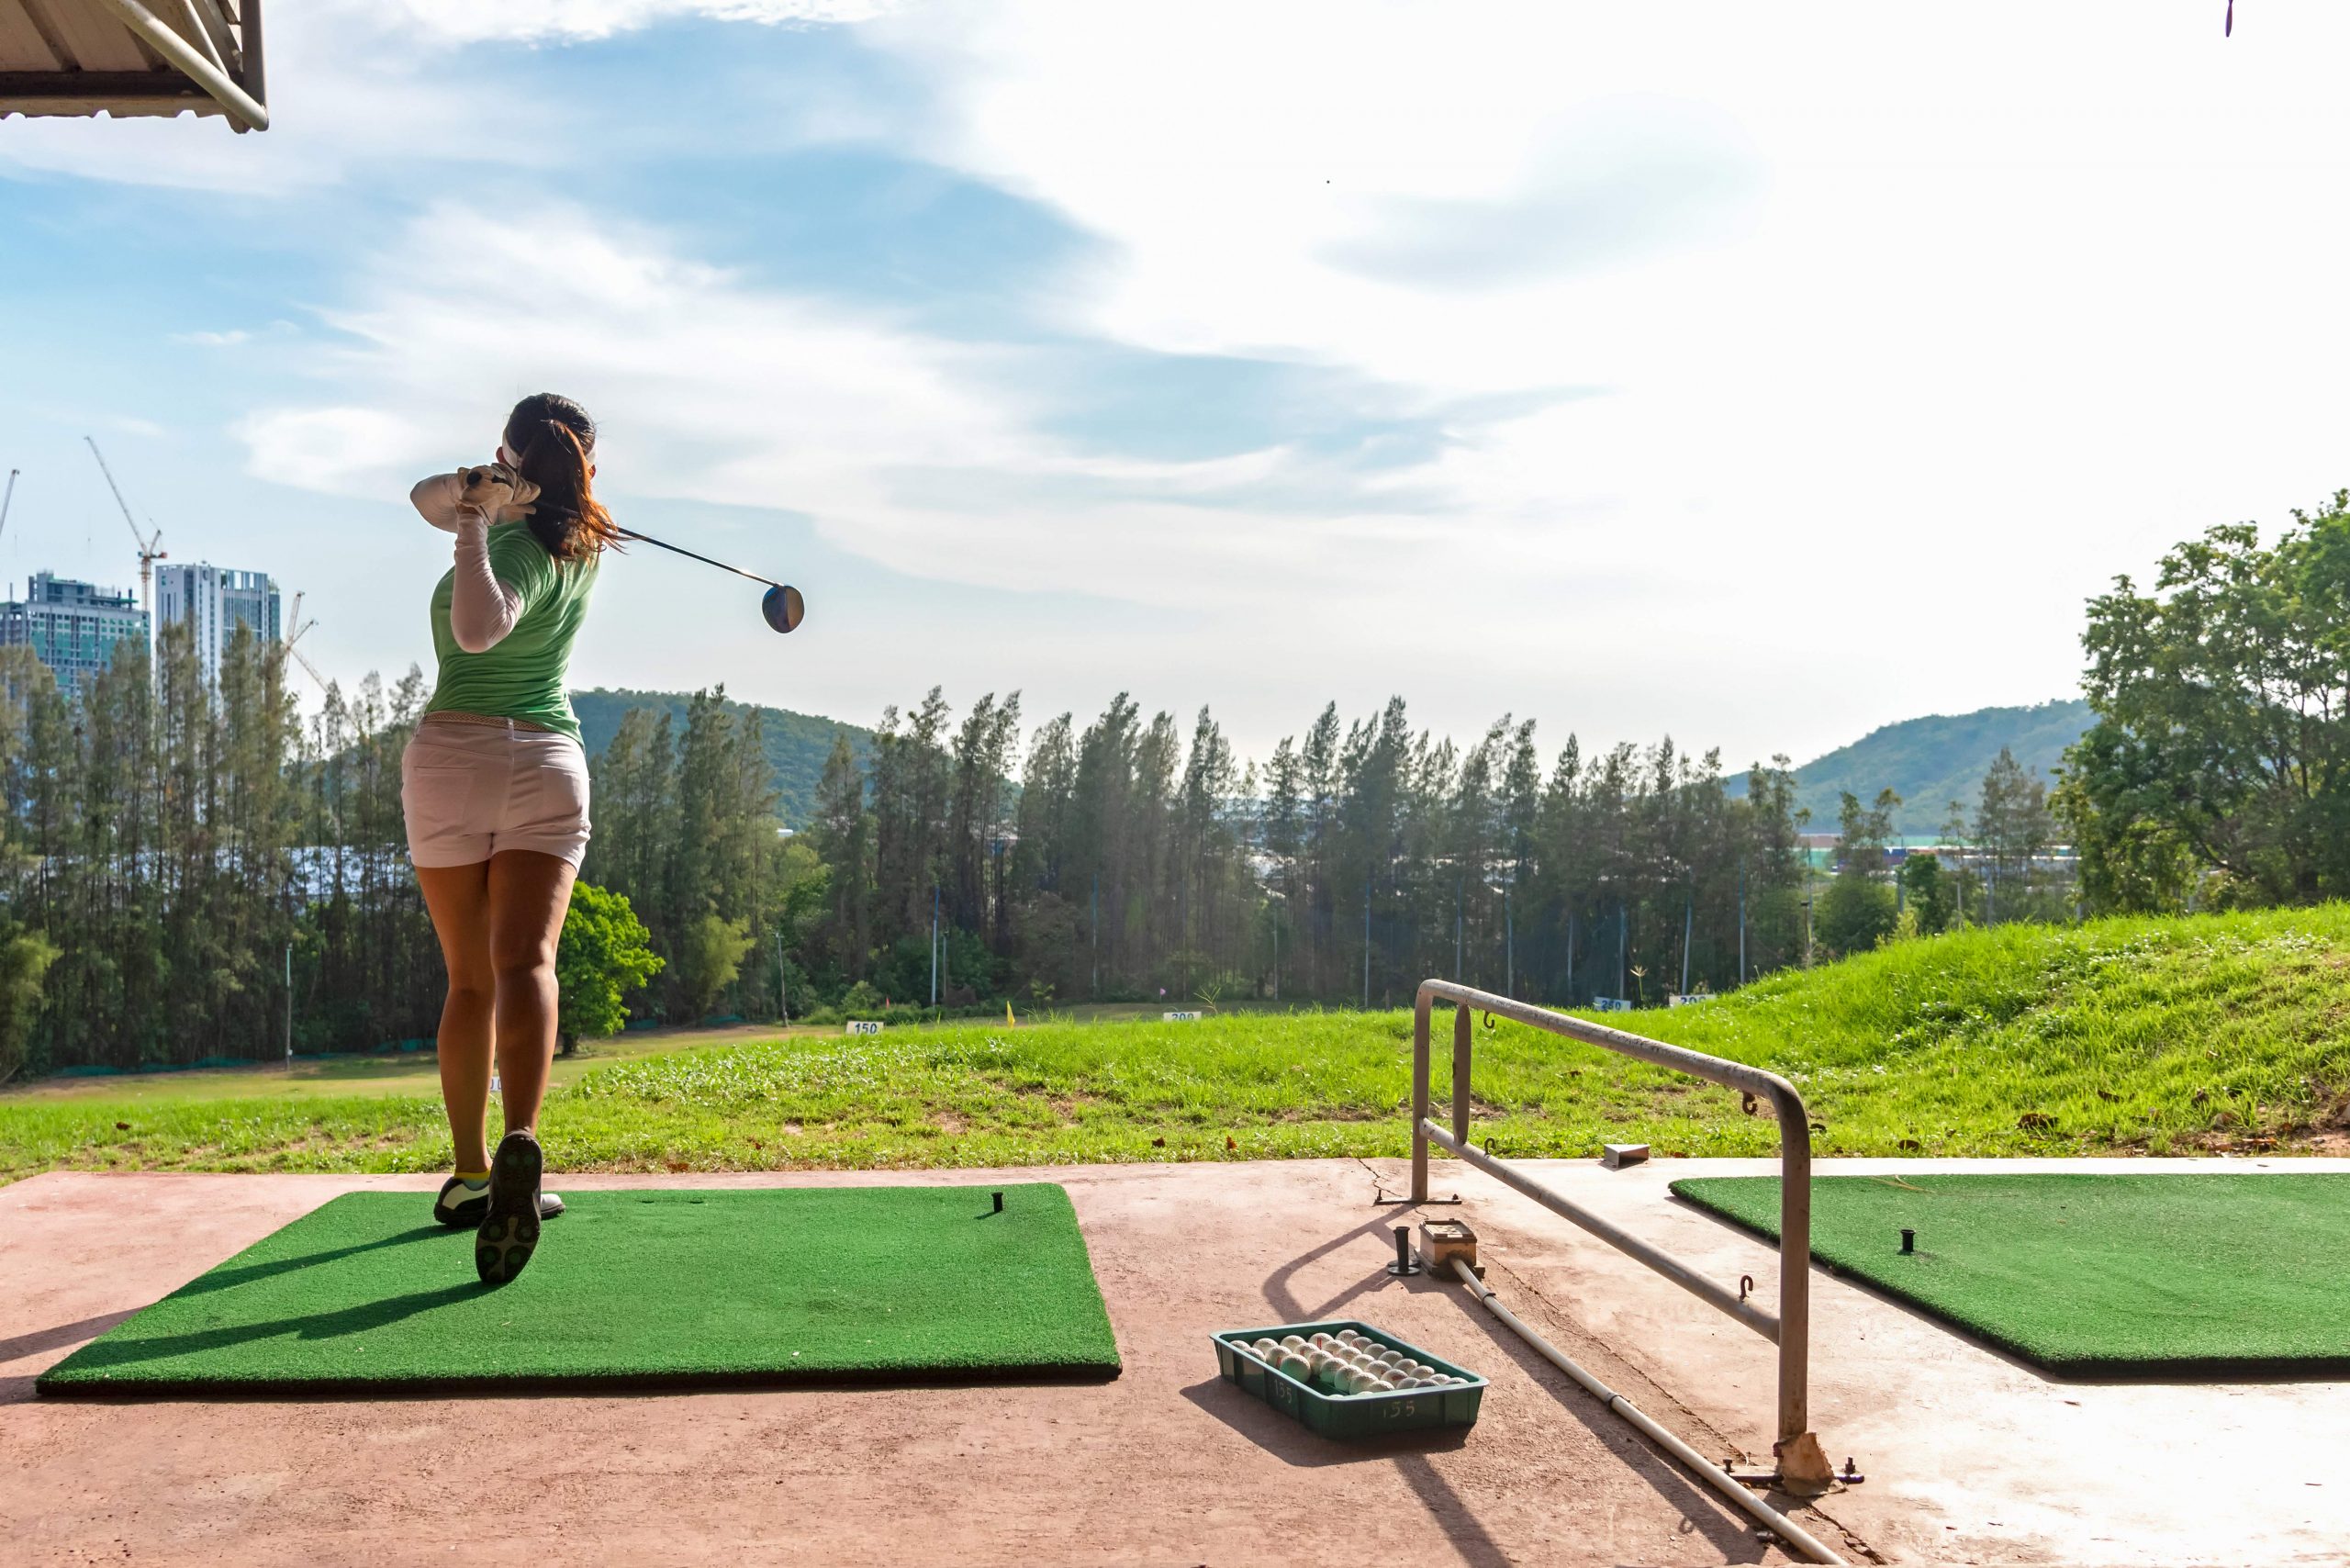 Improve Your Golf: Play Less & Practice More